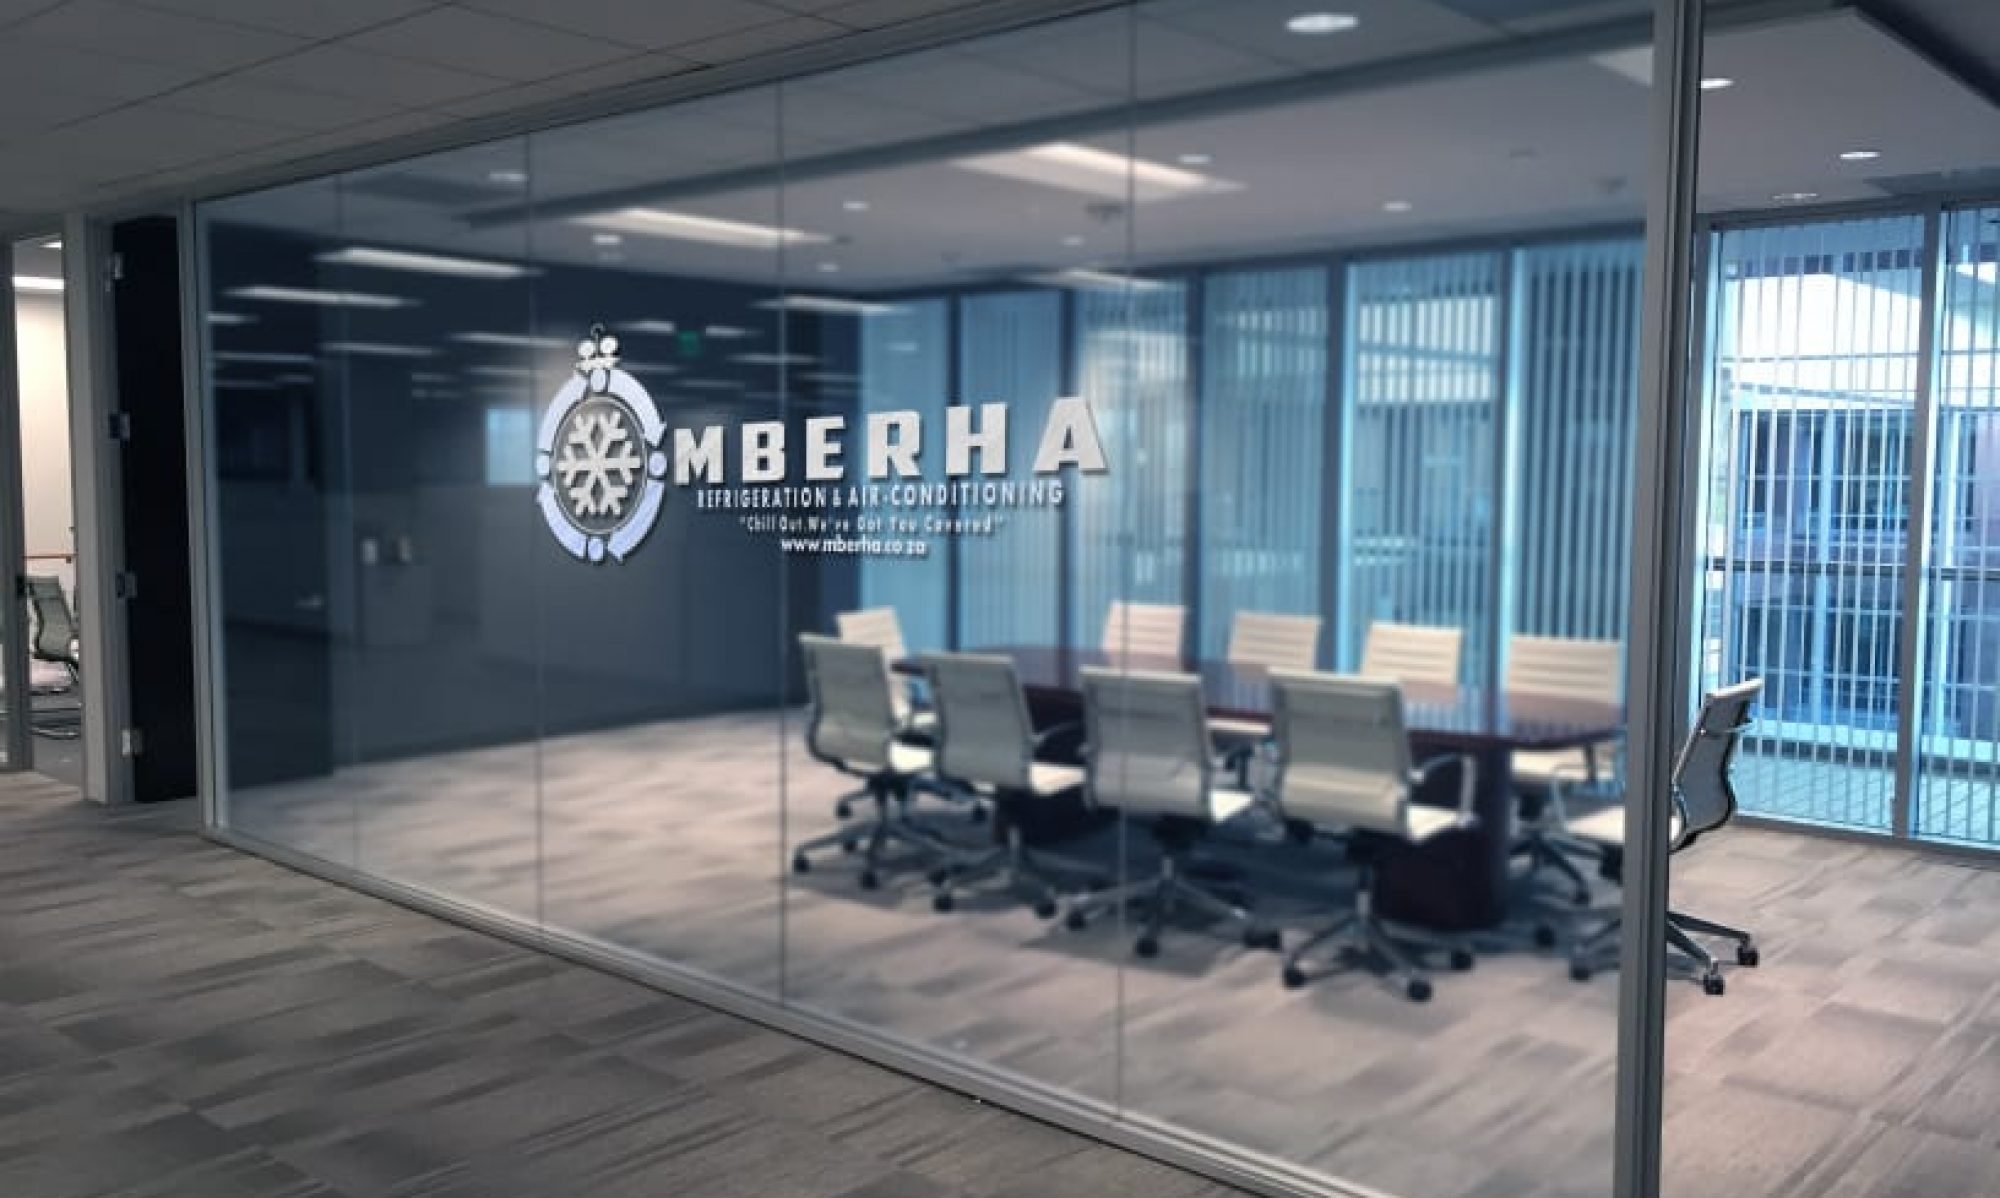 mberha refrigeration and air conditioning (pty) ltd